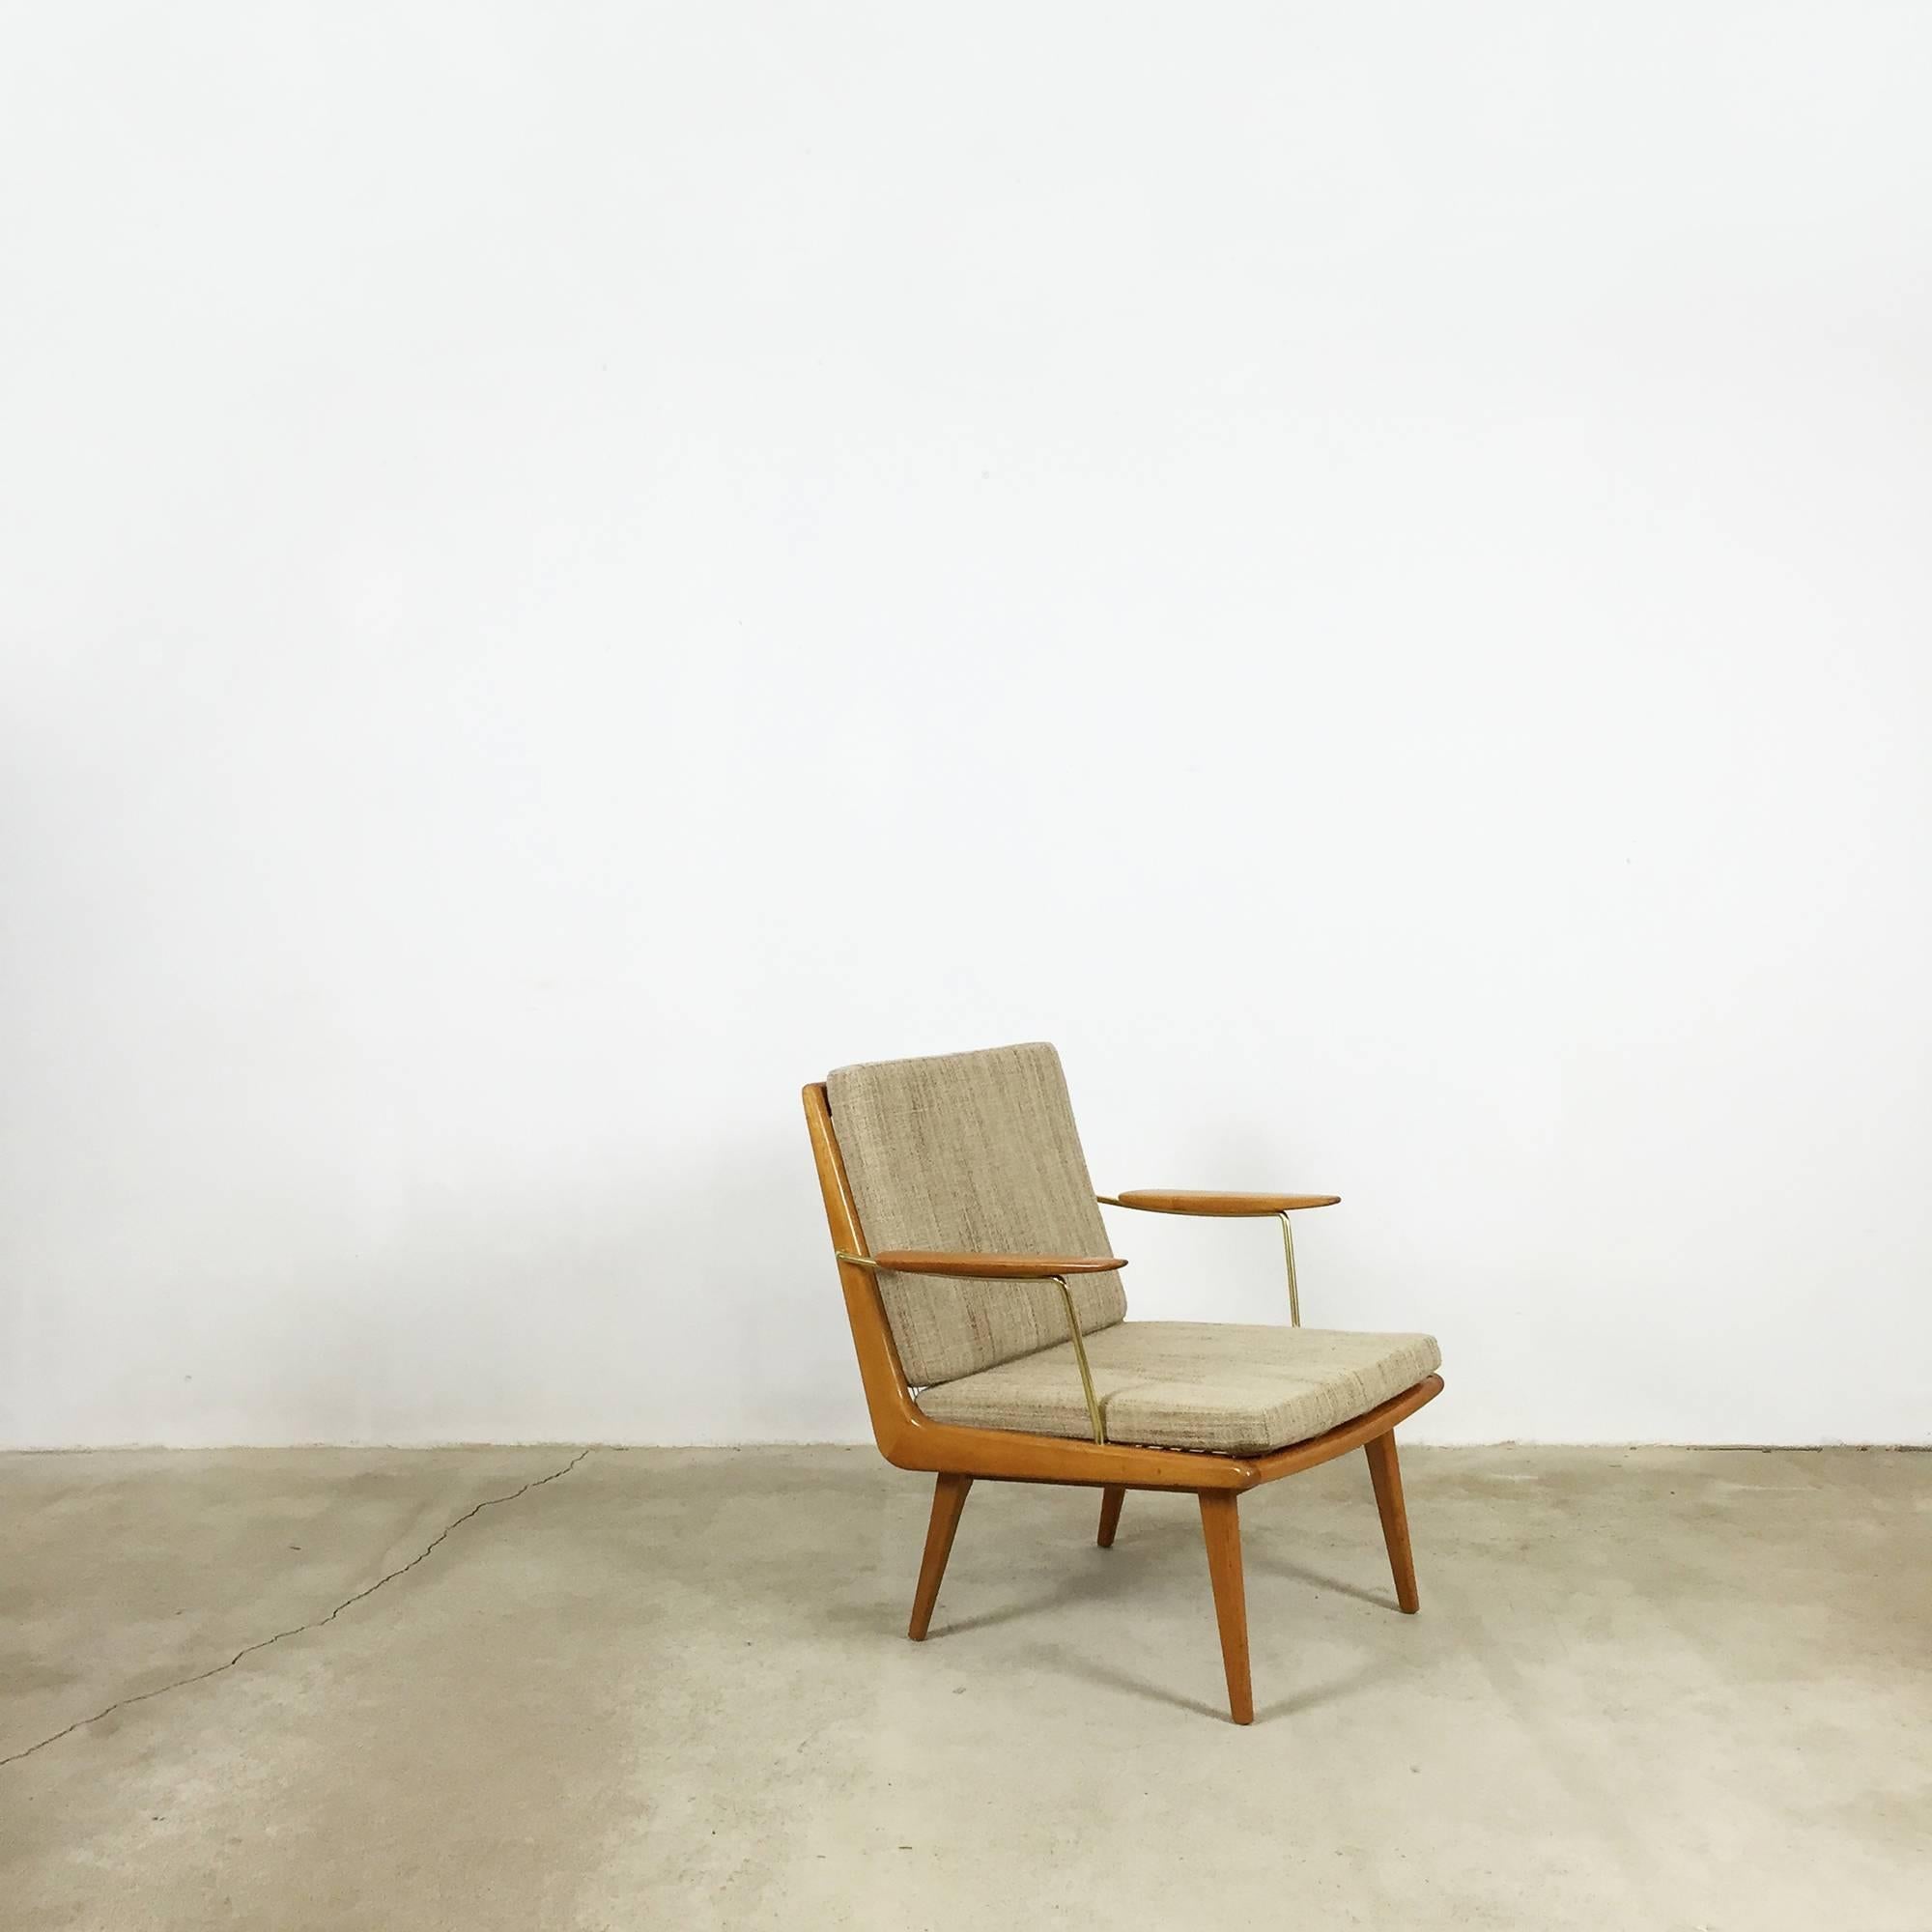 Hans mitzlaff Soloform boomerang easy chair
made by Eugen Schmidt, Soloform

This armchair easy chair was designed by Hans Mitzlaff & Albrecht Lange in 1953 and manufactured by Eugen Schmidt Soloform. It is made from solid wood. All original very